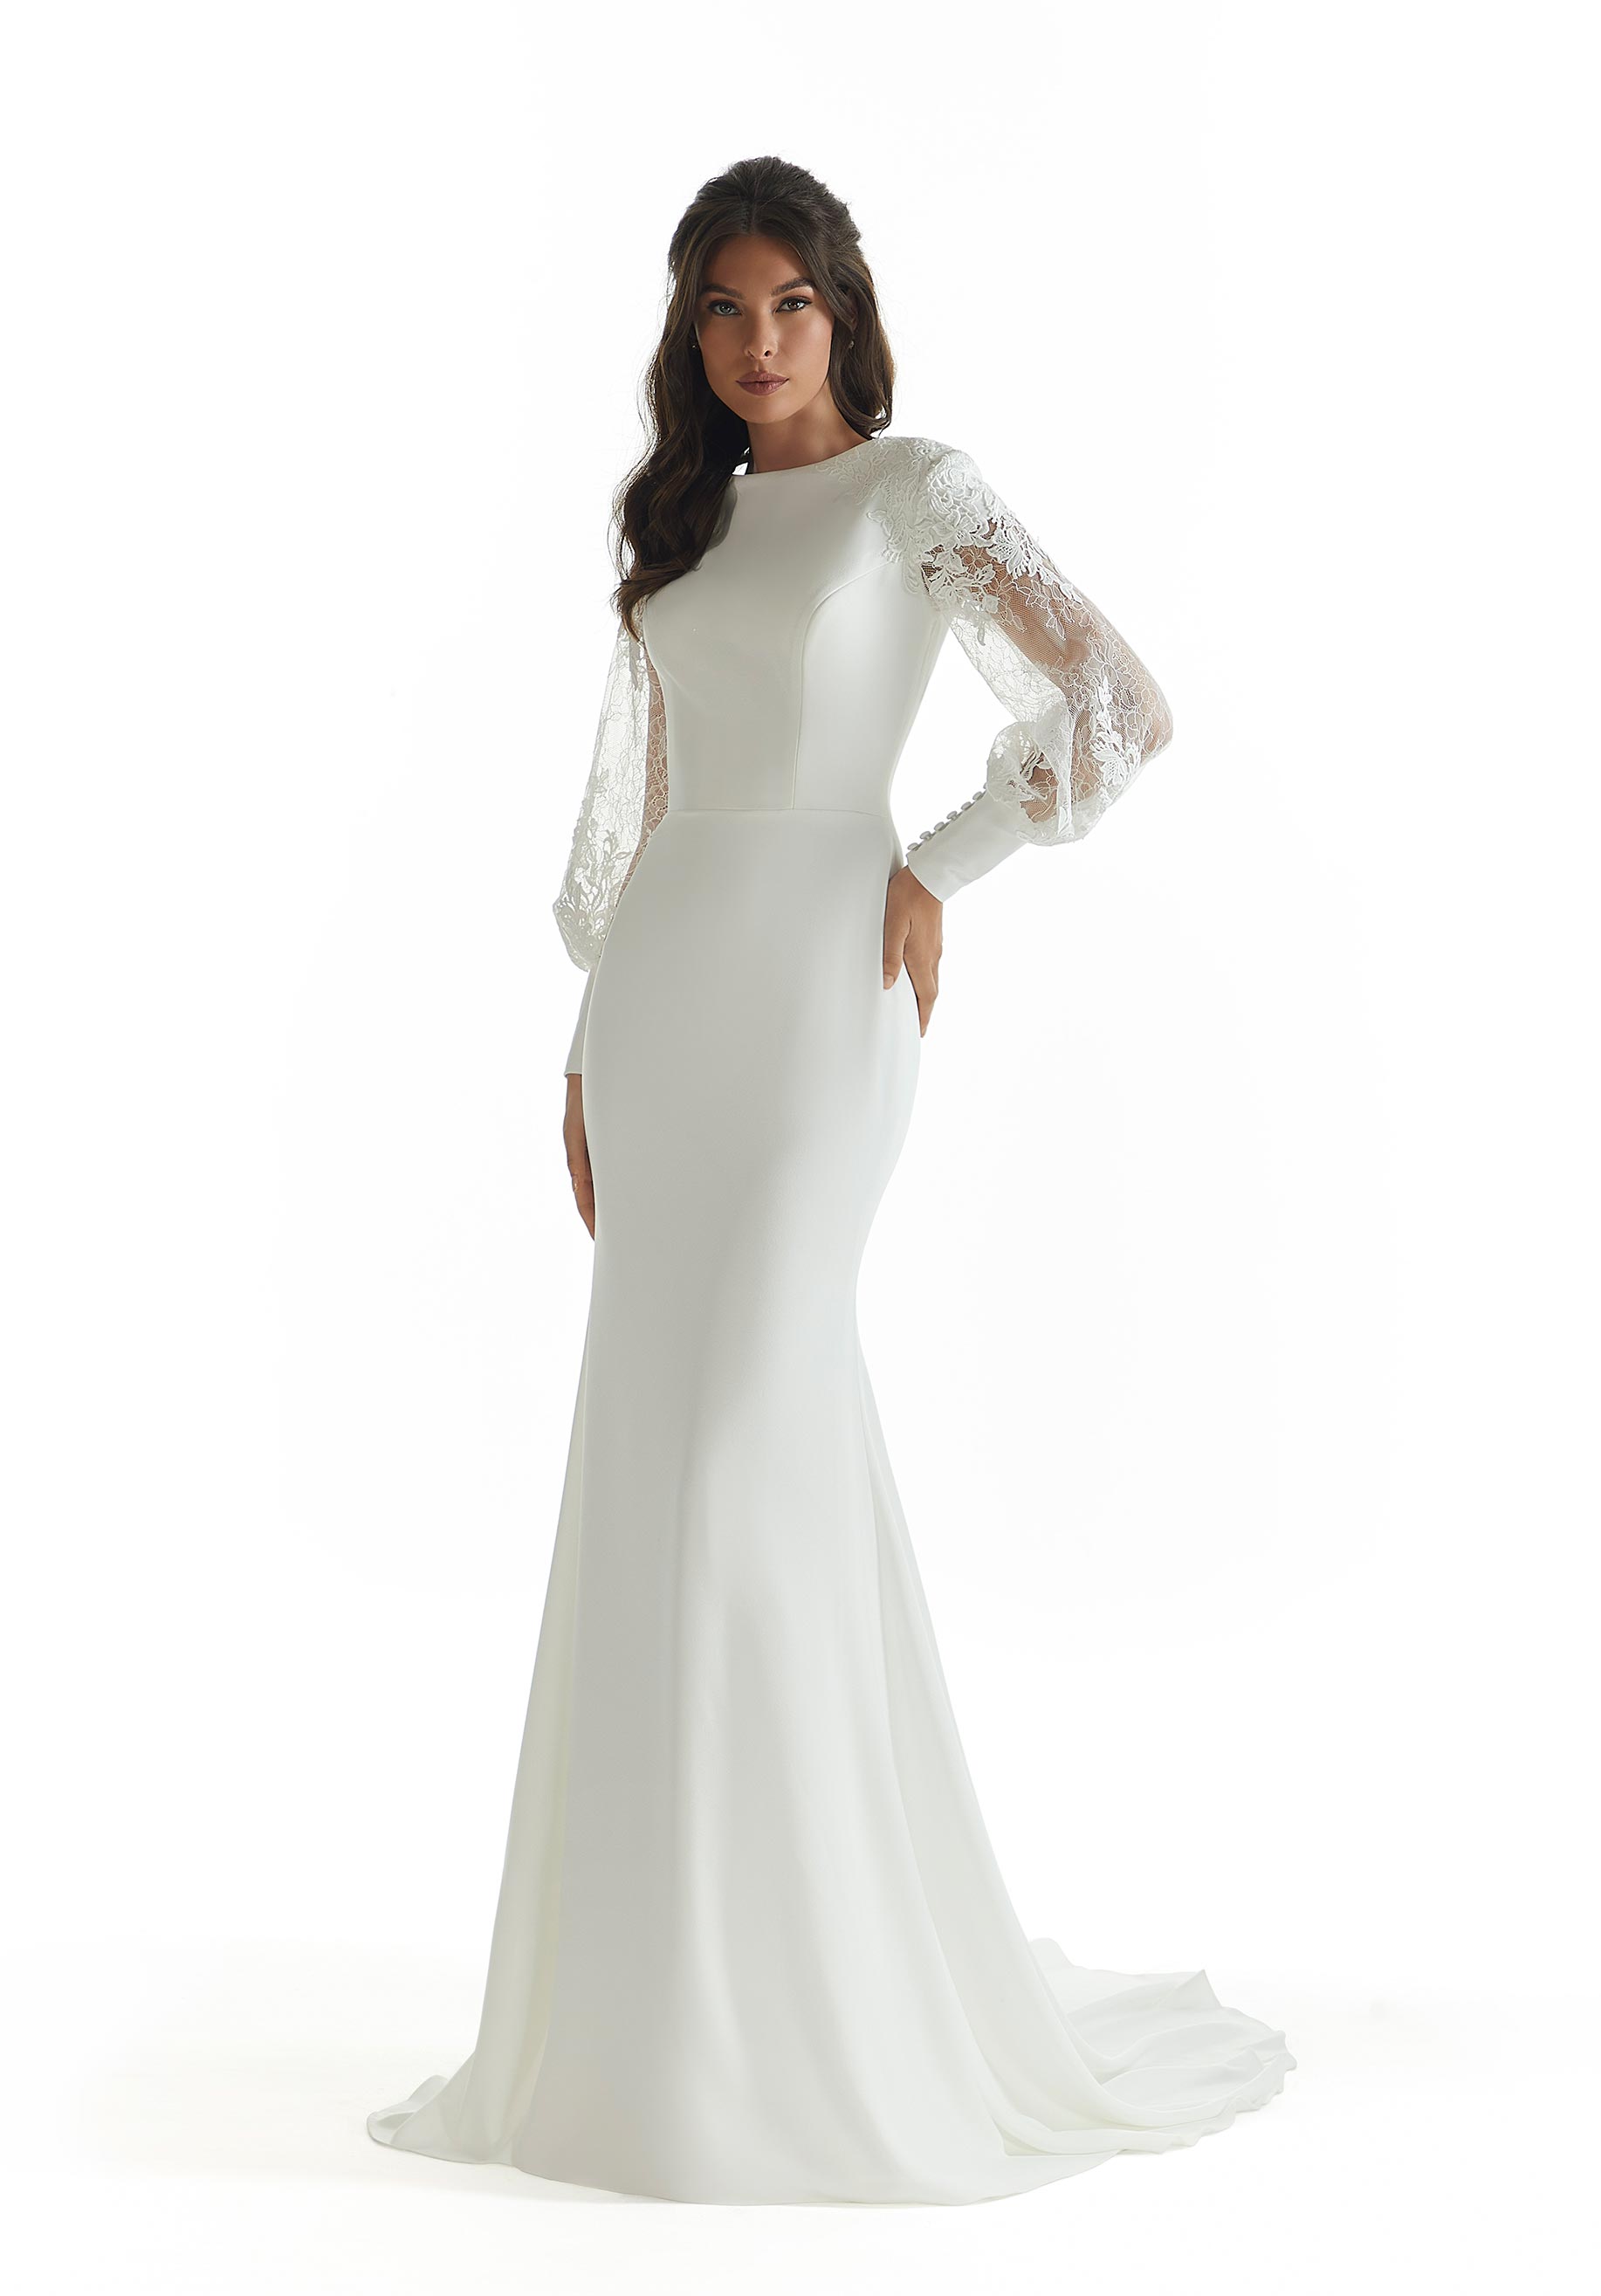 Choosing the Perfect Sleeves for your Wedding Dress - Fashionably Yours  Bridal & Formal Wear